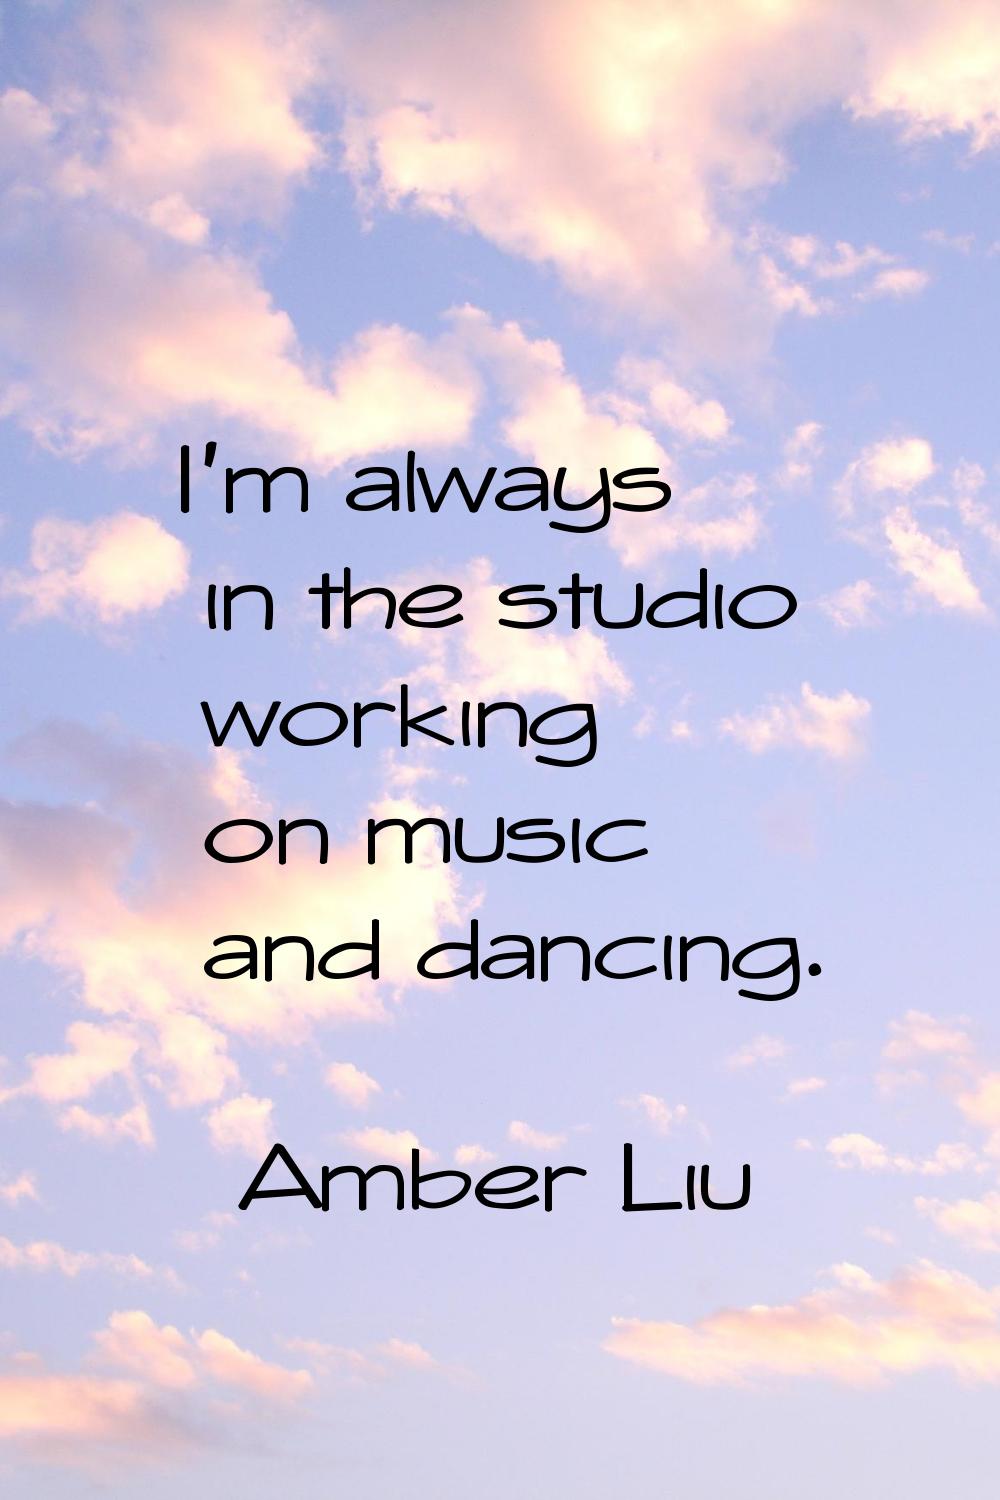 I'm always in the studio working on music and dancing.